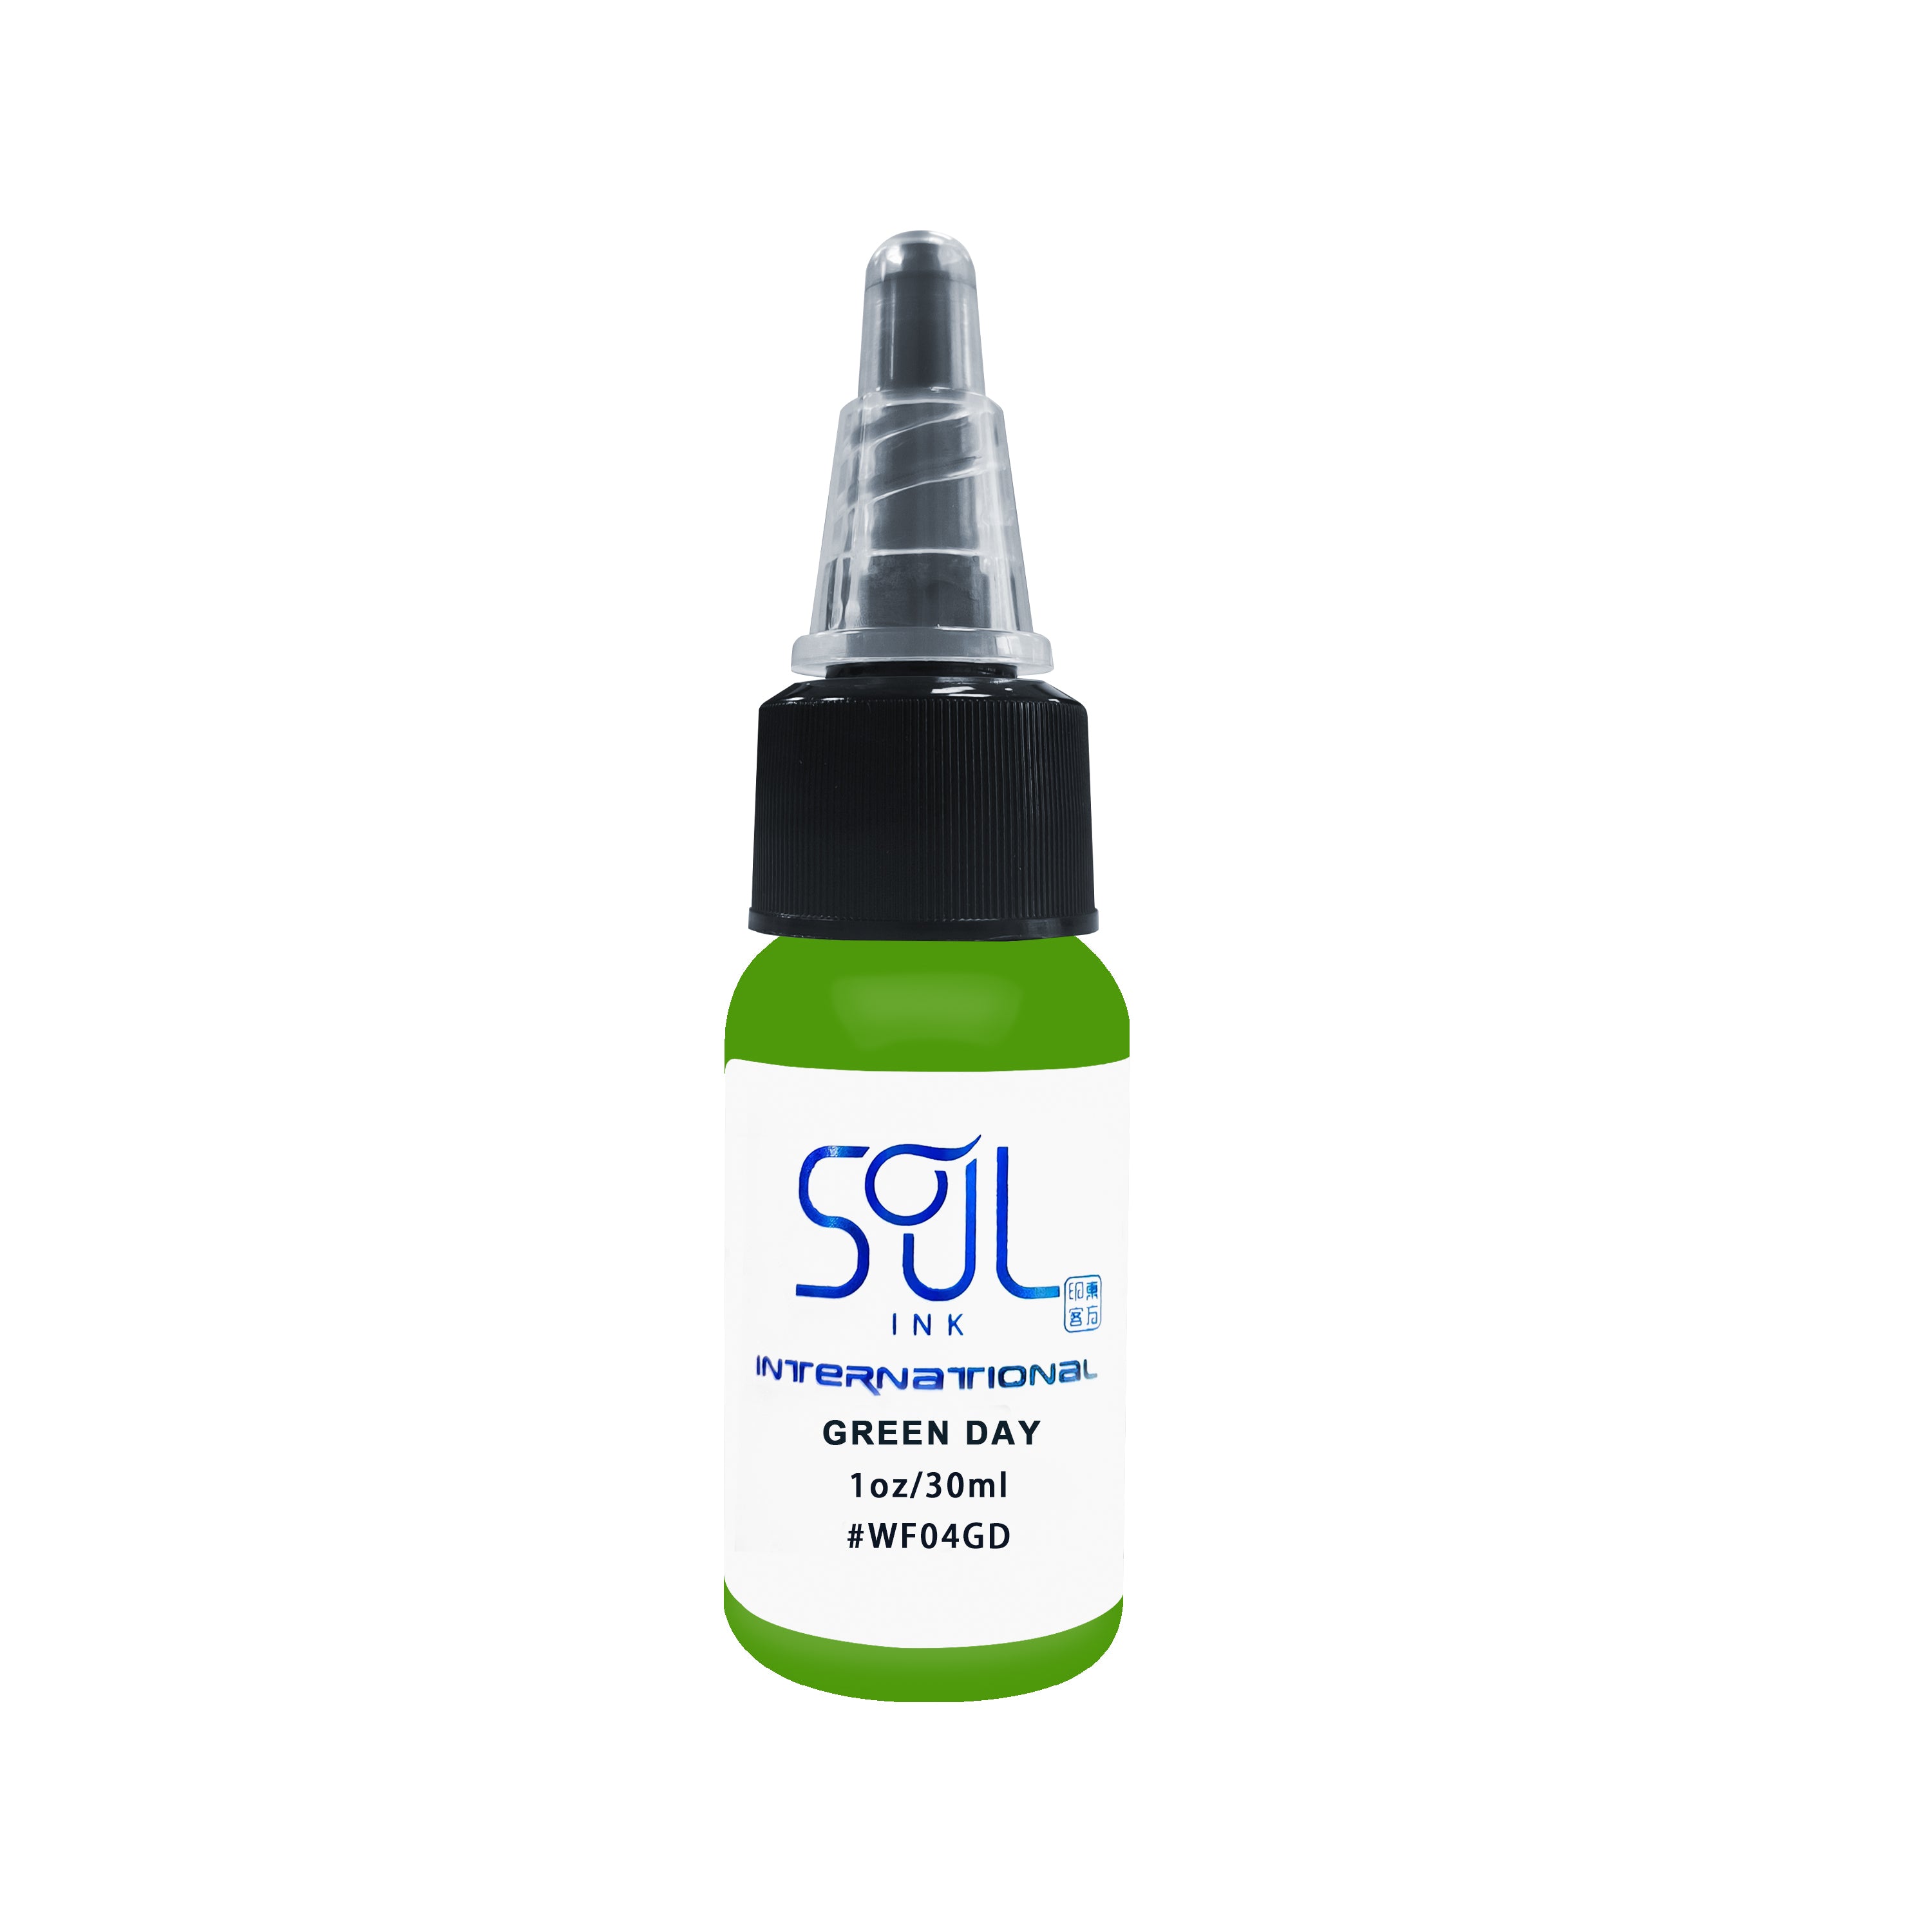 Photograph of a bottle of 'Soul Ink' brand green day ink. The label prominently displays the brand name 'Soul Ink' in stylish blue typography against a white background. The green day 30 ml bottle with a white label featuring the brands name 'Soul Ink'.